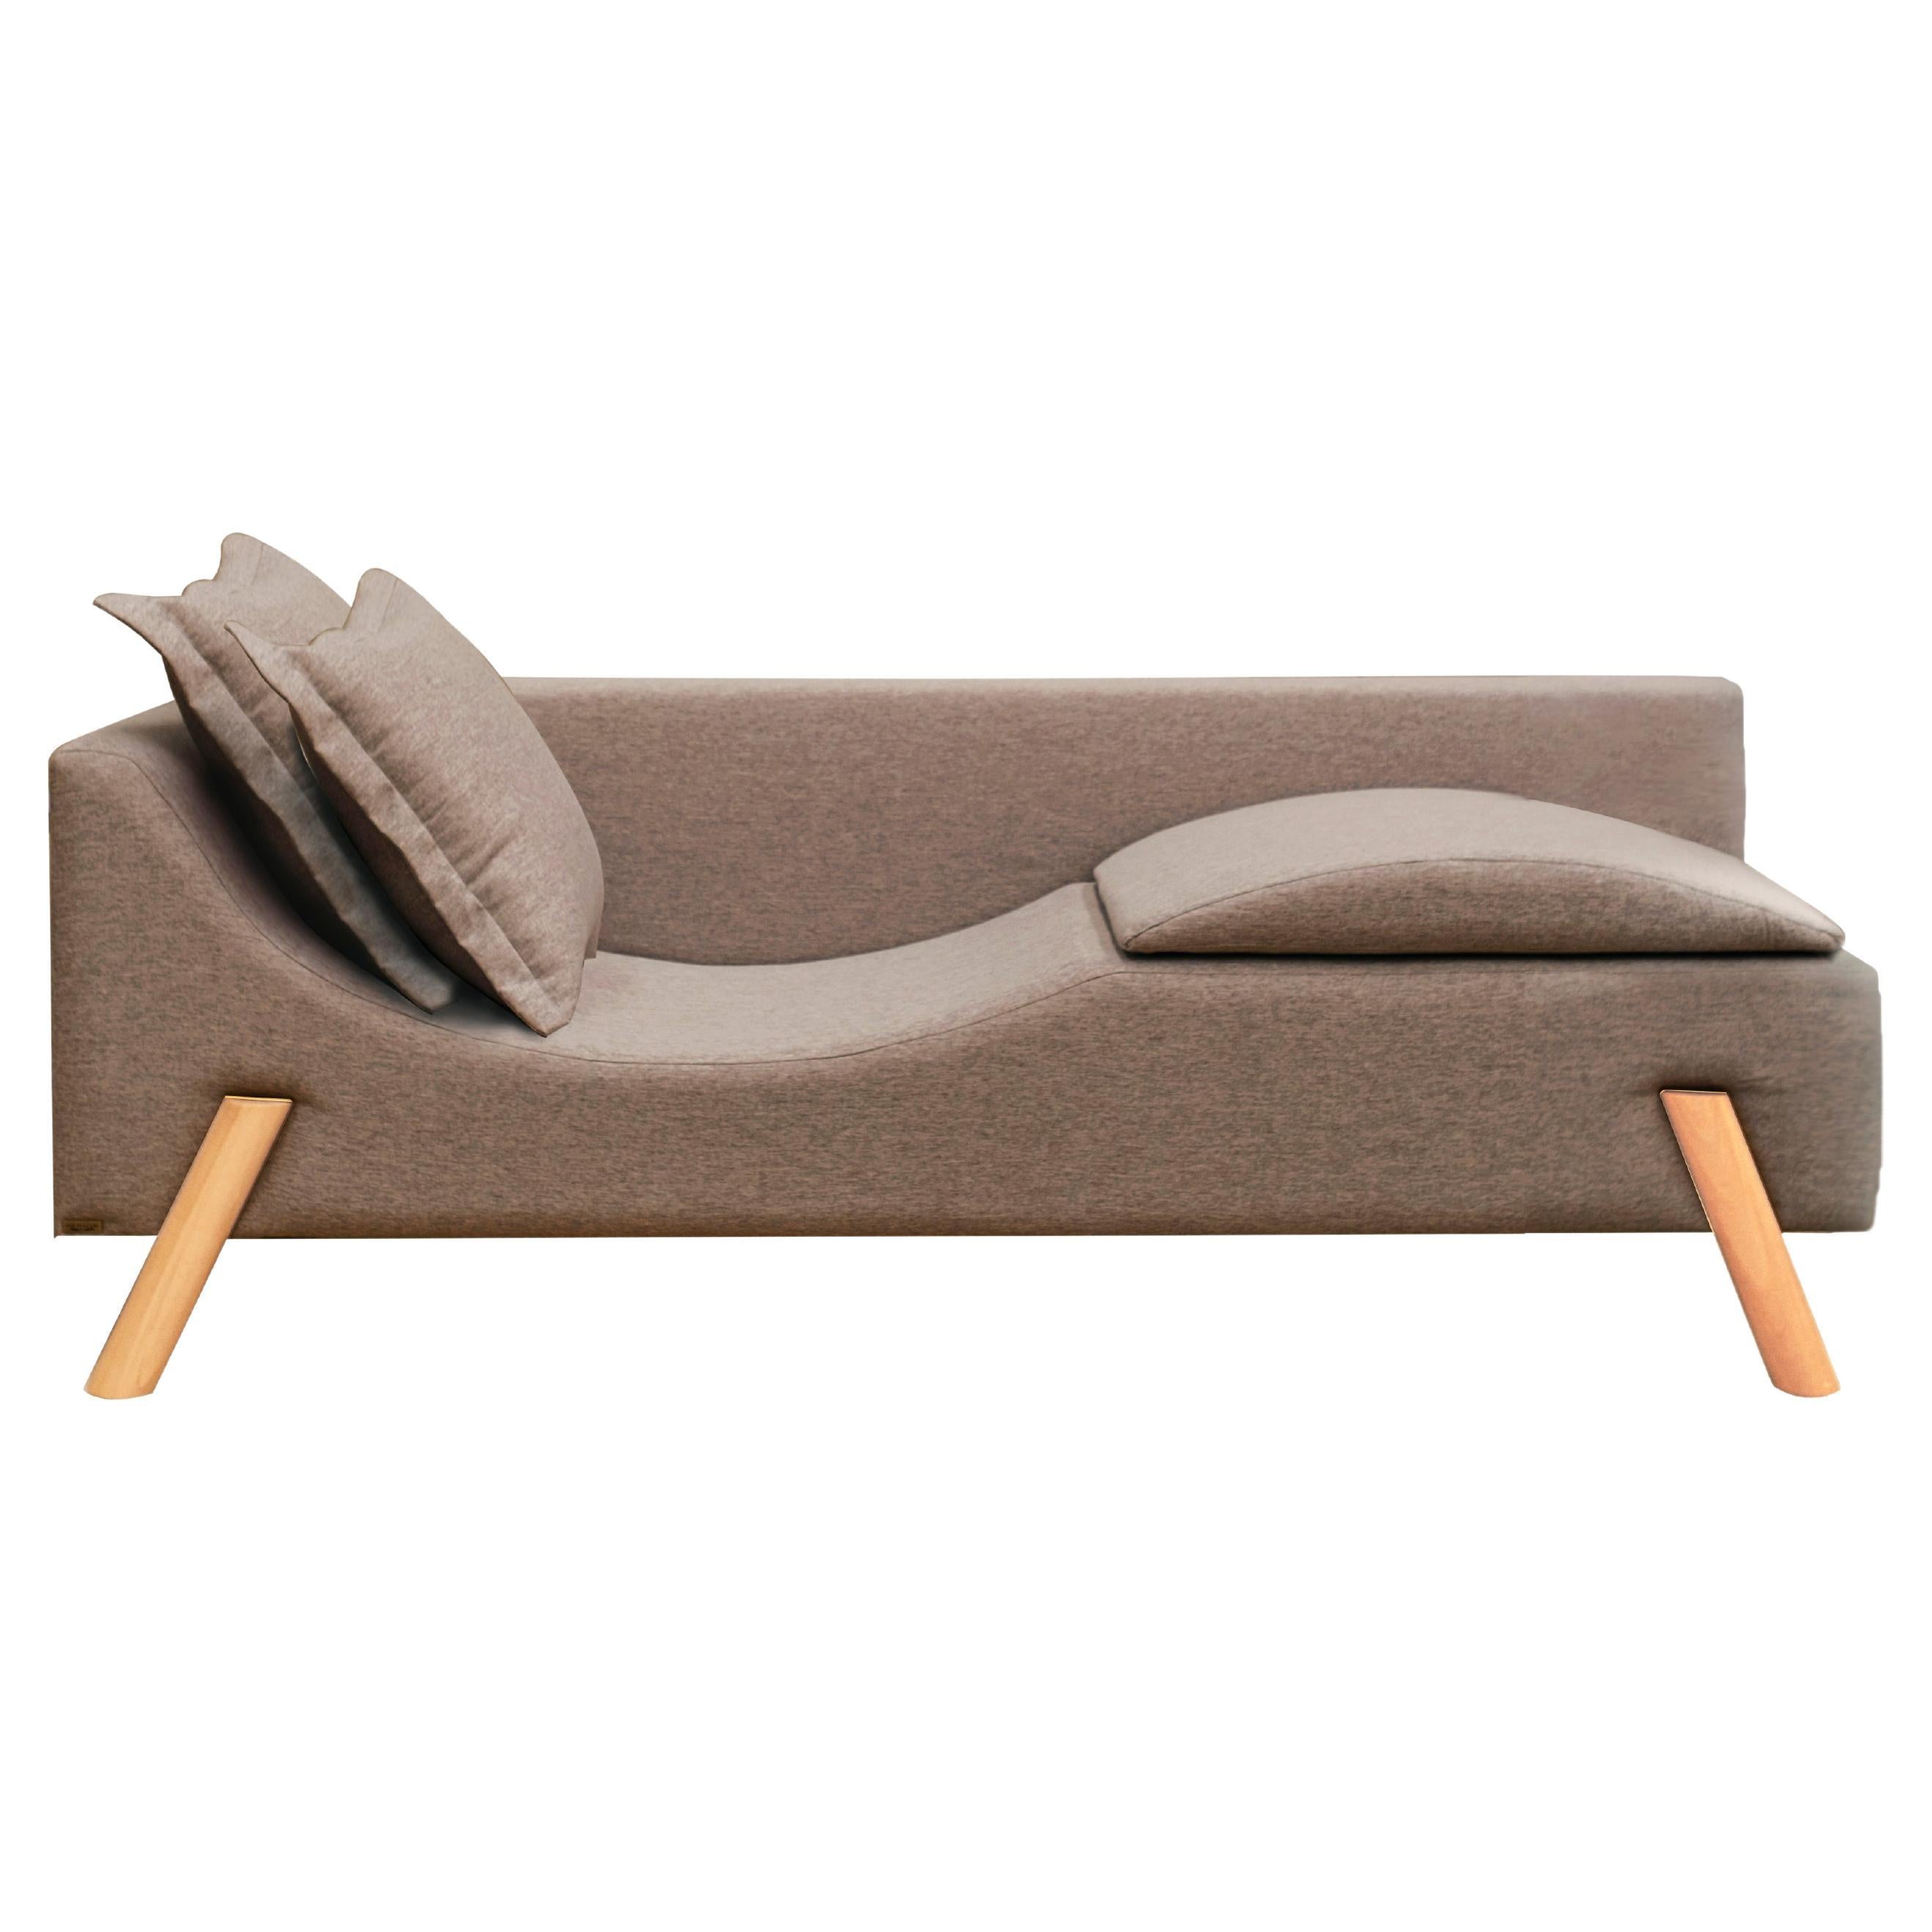 "Flag" Couch Chaise Longue in Dark Brown Linen and Wood Feet, Small Size